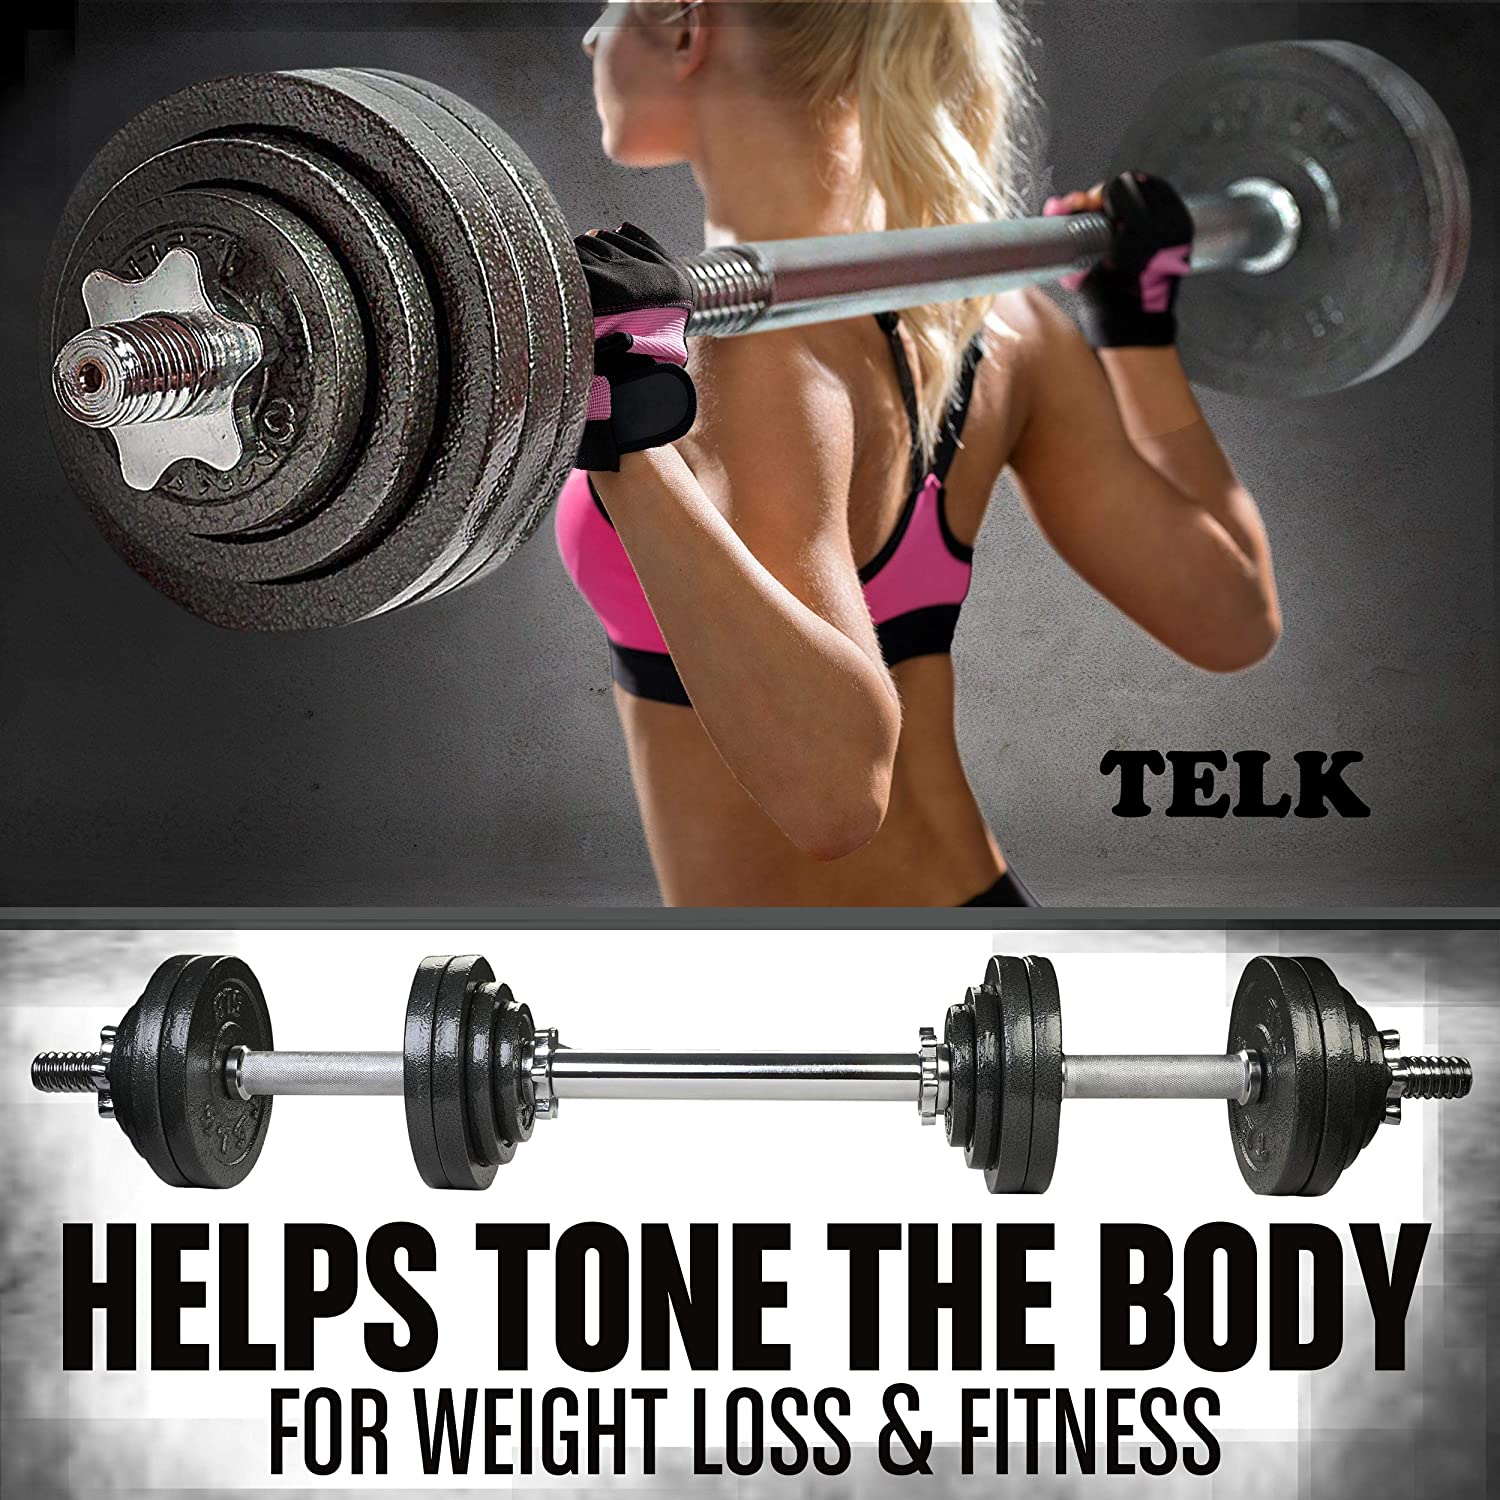 Telk Fitness Adjustable Dumbbells 45 Lbs., Hand Weights for Home Gym - image 4 of 6